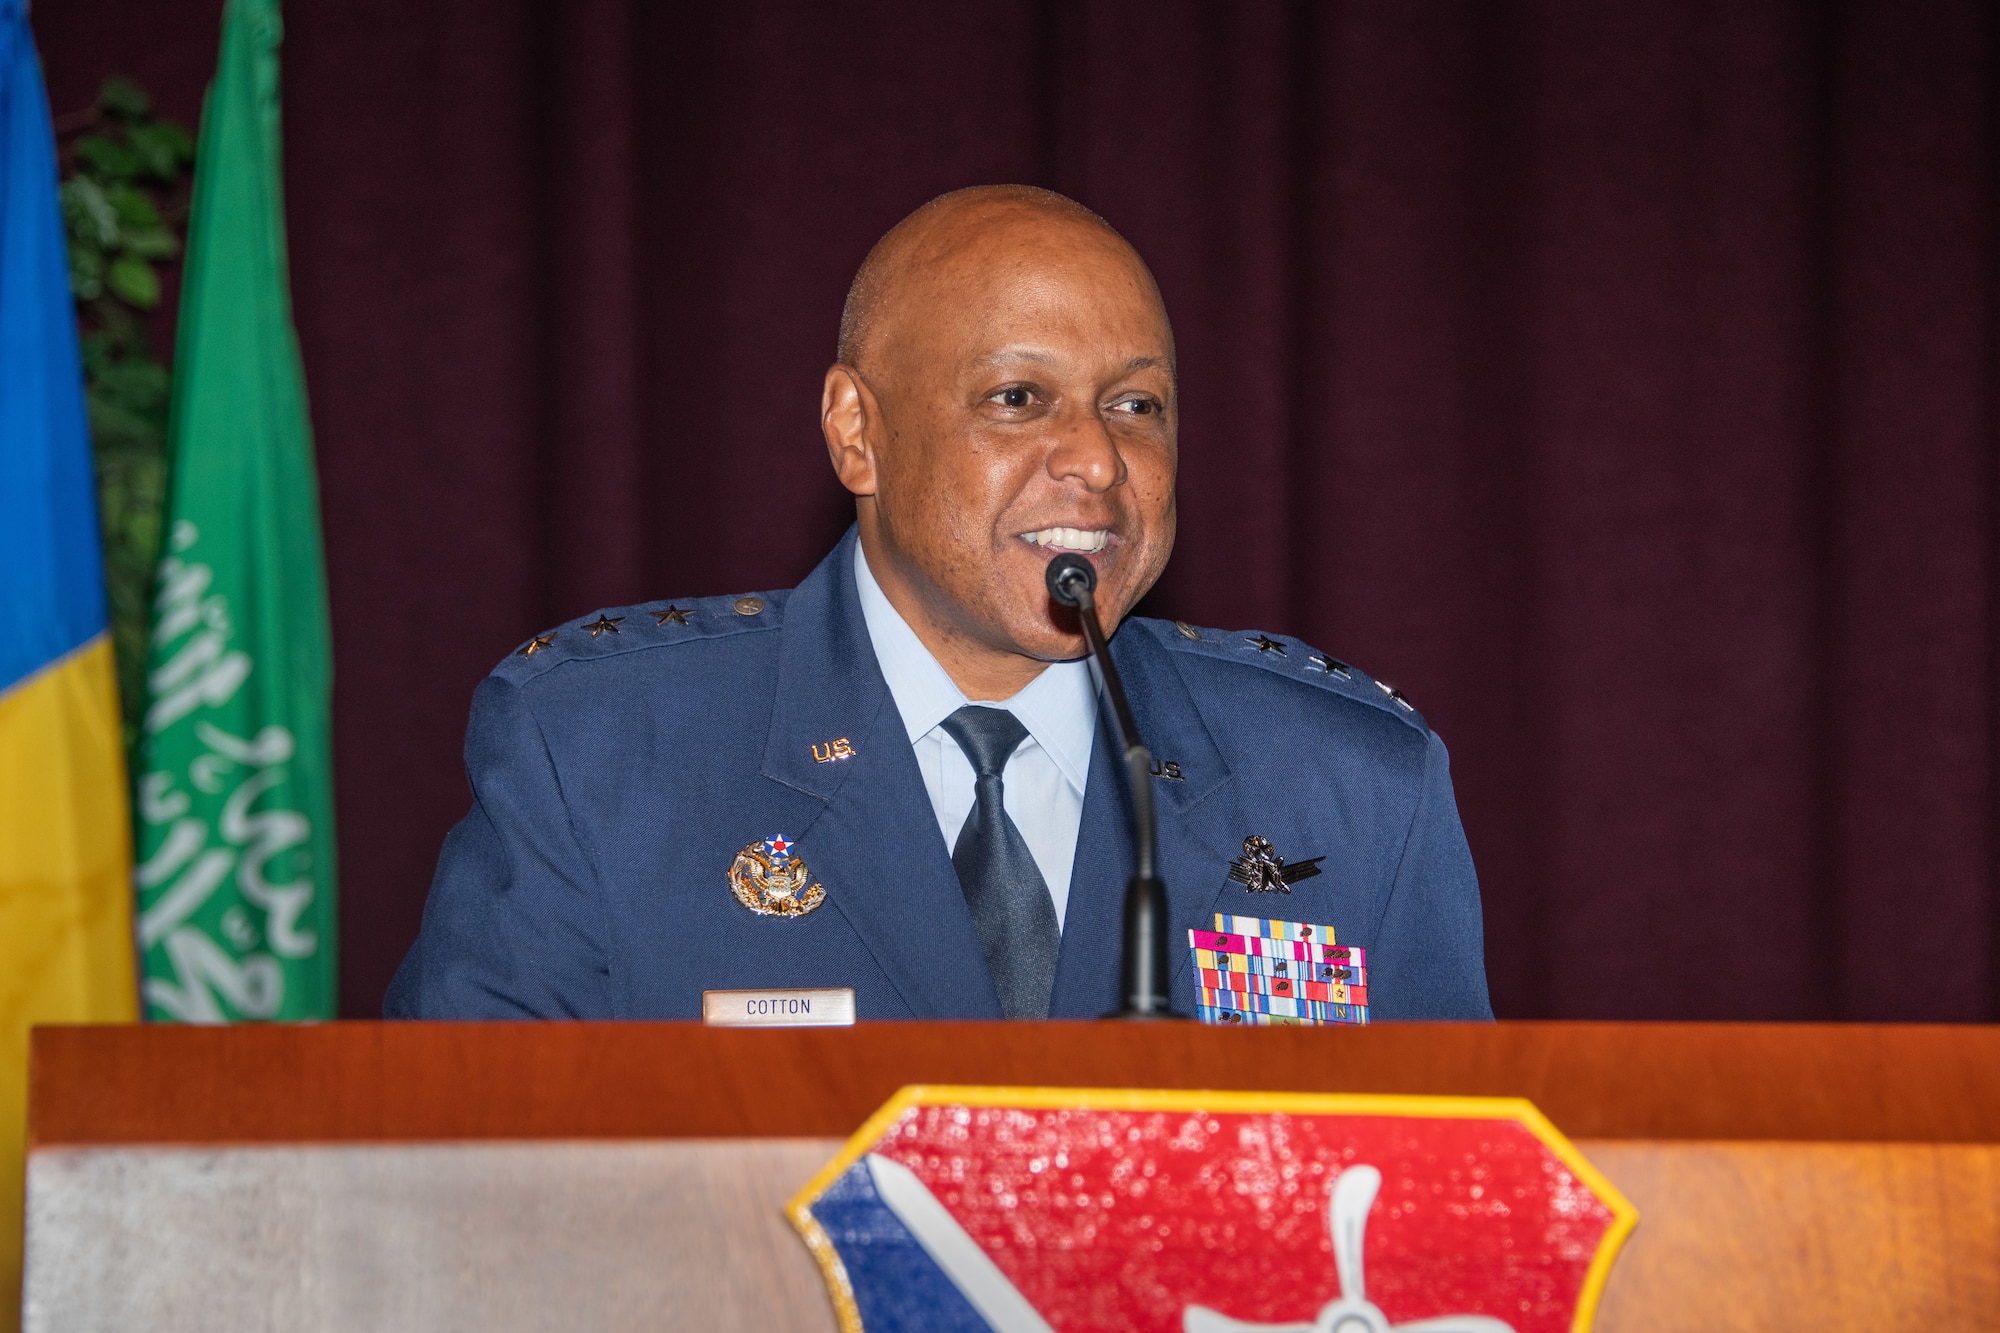 Lt. Gen. Anthony J. Cotton, Air University Commander and President, welcomes the incoming Barnes Center for Enlisted Education, Col. Kathryn A. Brown, at the Air Force Senior Noncommissioned Officer Academy Auditorium, Gunter Annex, Alabama. Brown served as the commander of the 42nd Force Support Squadron from July 2009 to July 2011 and chief of the then-42nd Services Division from July 2008 to July 2009.